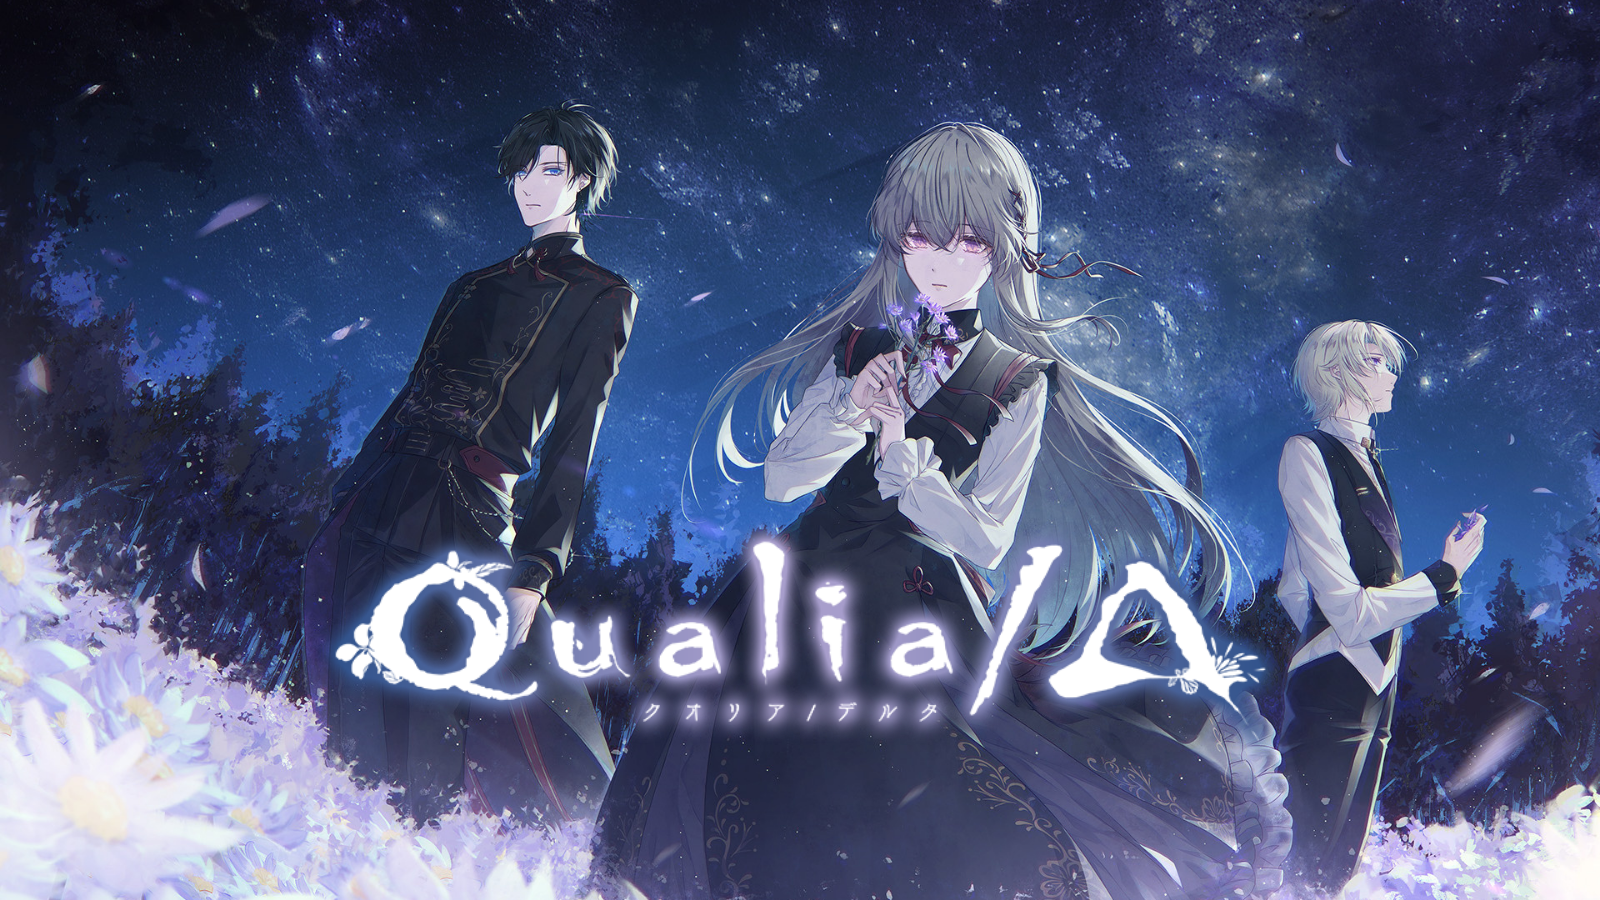 Primula Launches Site for New Title, “Qualia/Δ” Tentative English and Simplified Chinese Support